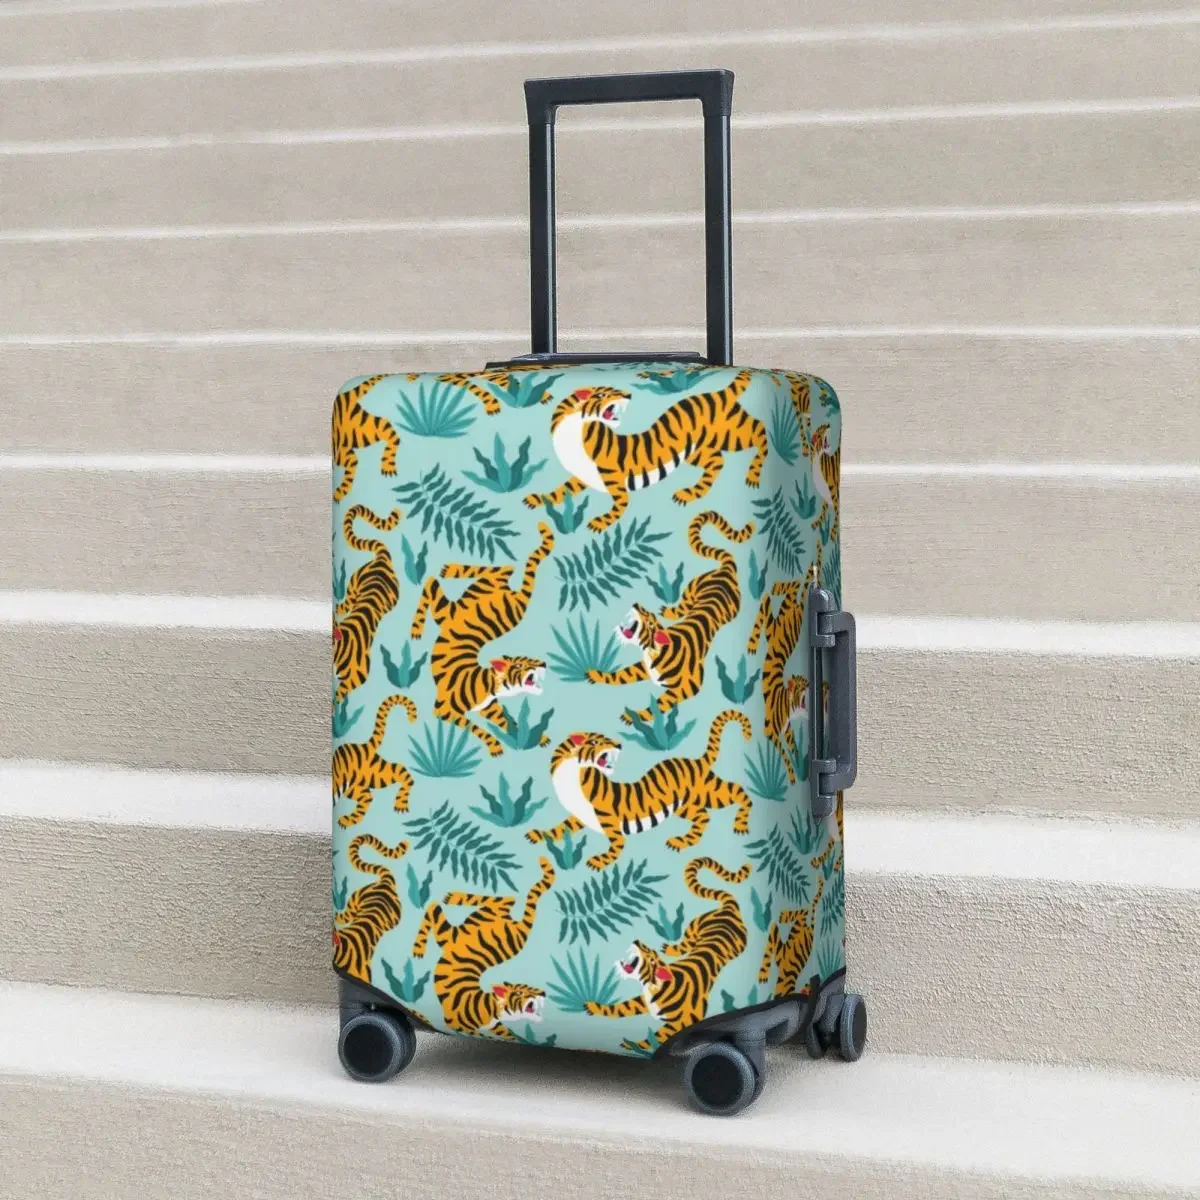 

Tigers Print Suitcase Cover Vintage Tropical Leaves Animal Practical Cruise Trip Protector Luggage Supplies Holiday